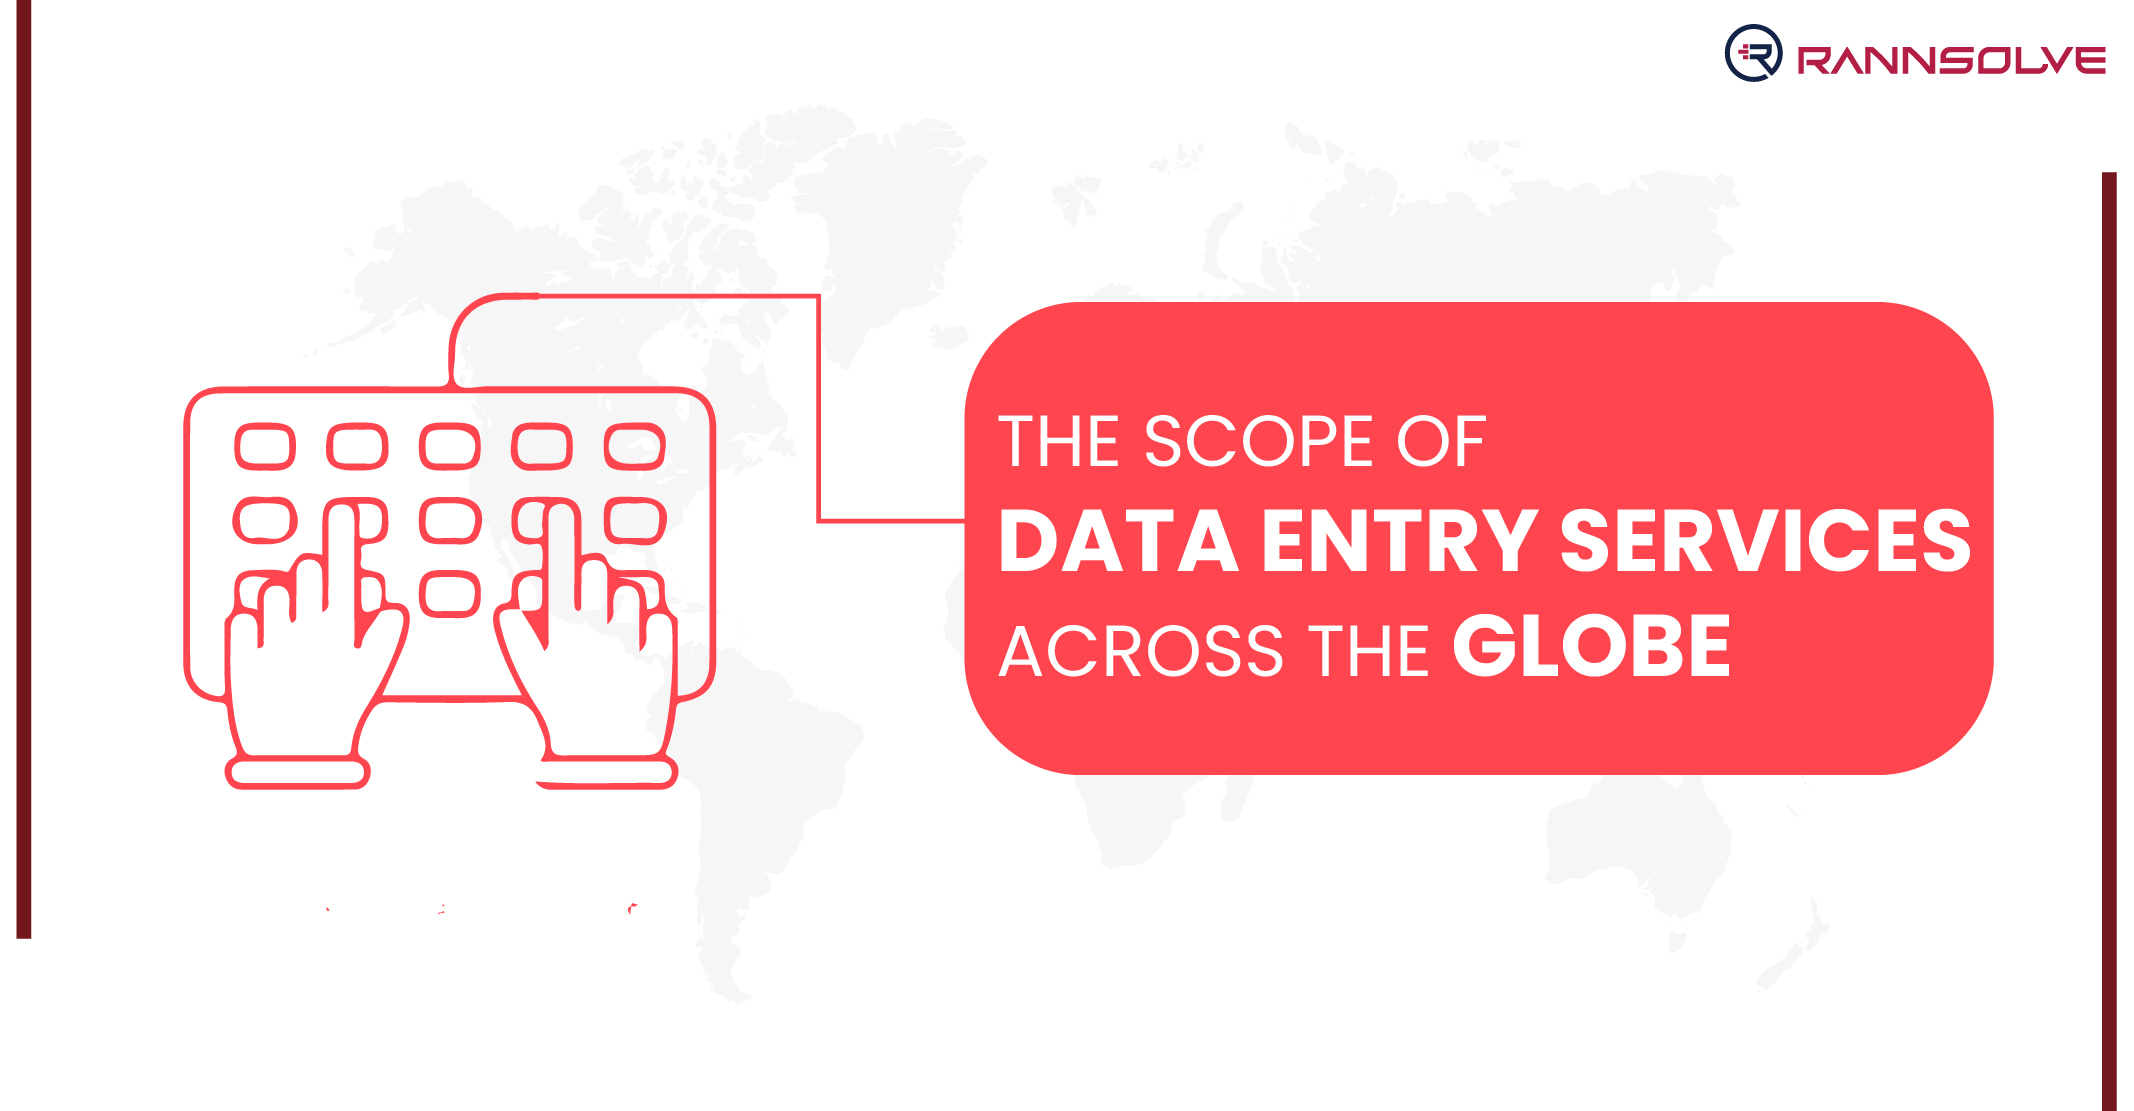 THE SCOPE OF DATA ENTRY SERVICES ACROSS THE GLOBE